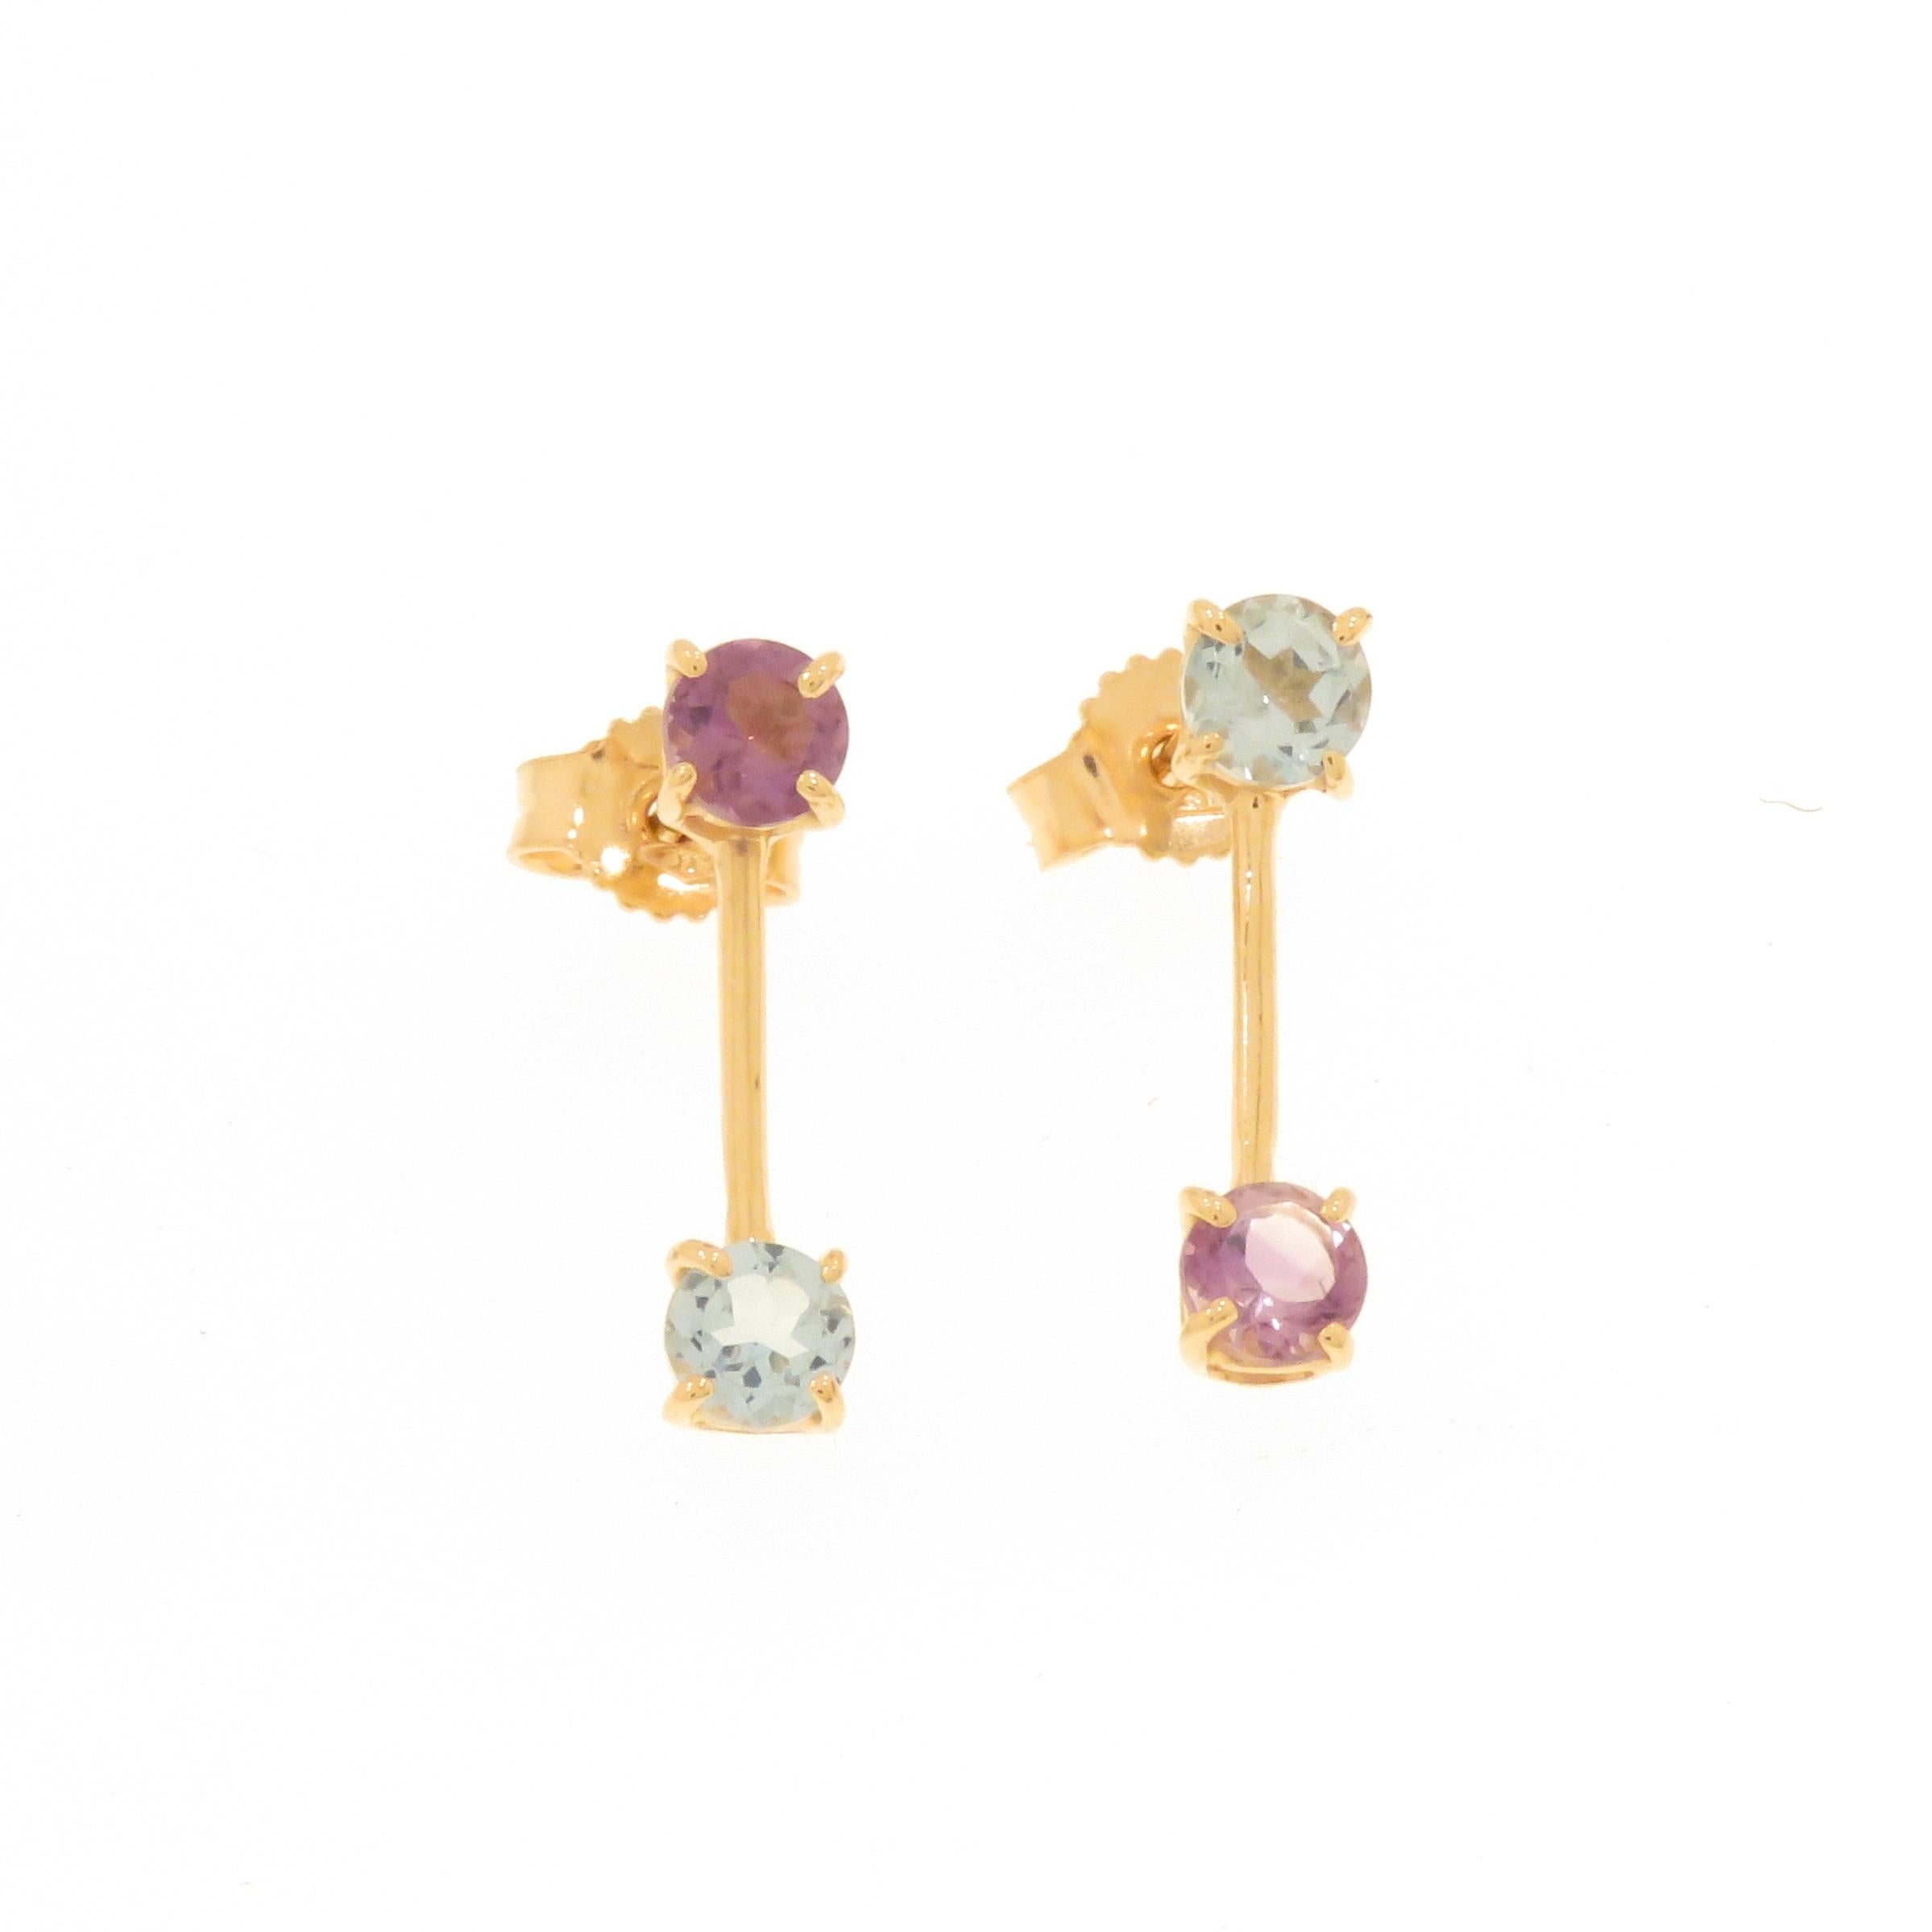 Contemporary Blue Topaz Amethyst 9 Karat Rose Gold Earrings Handcrafted in Italy For Sale